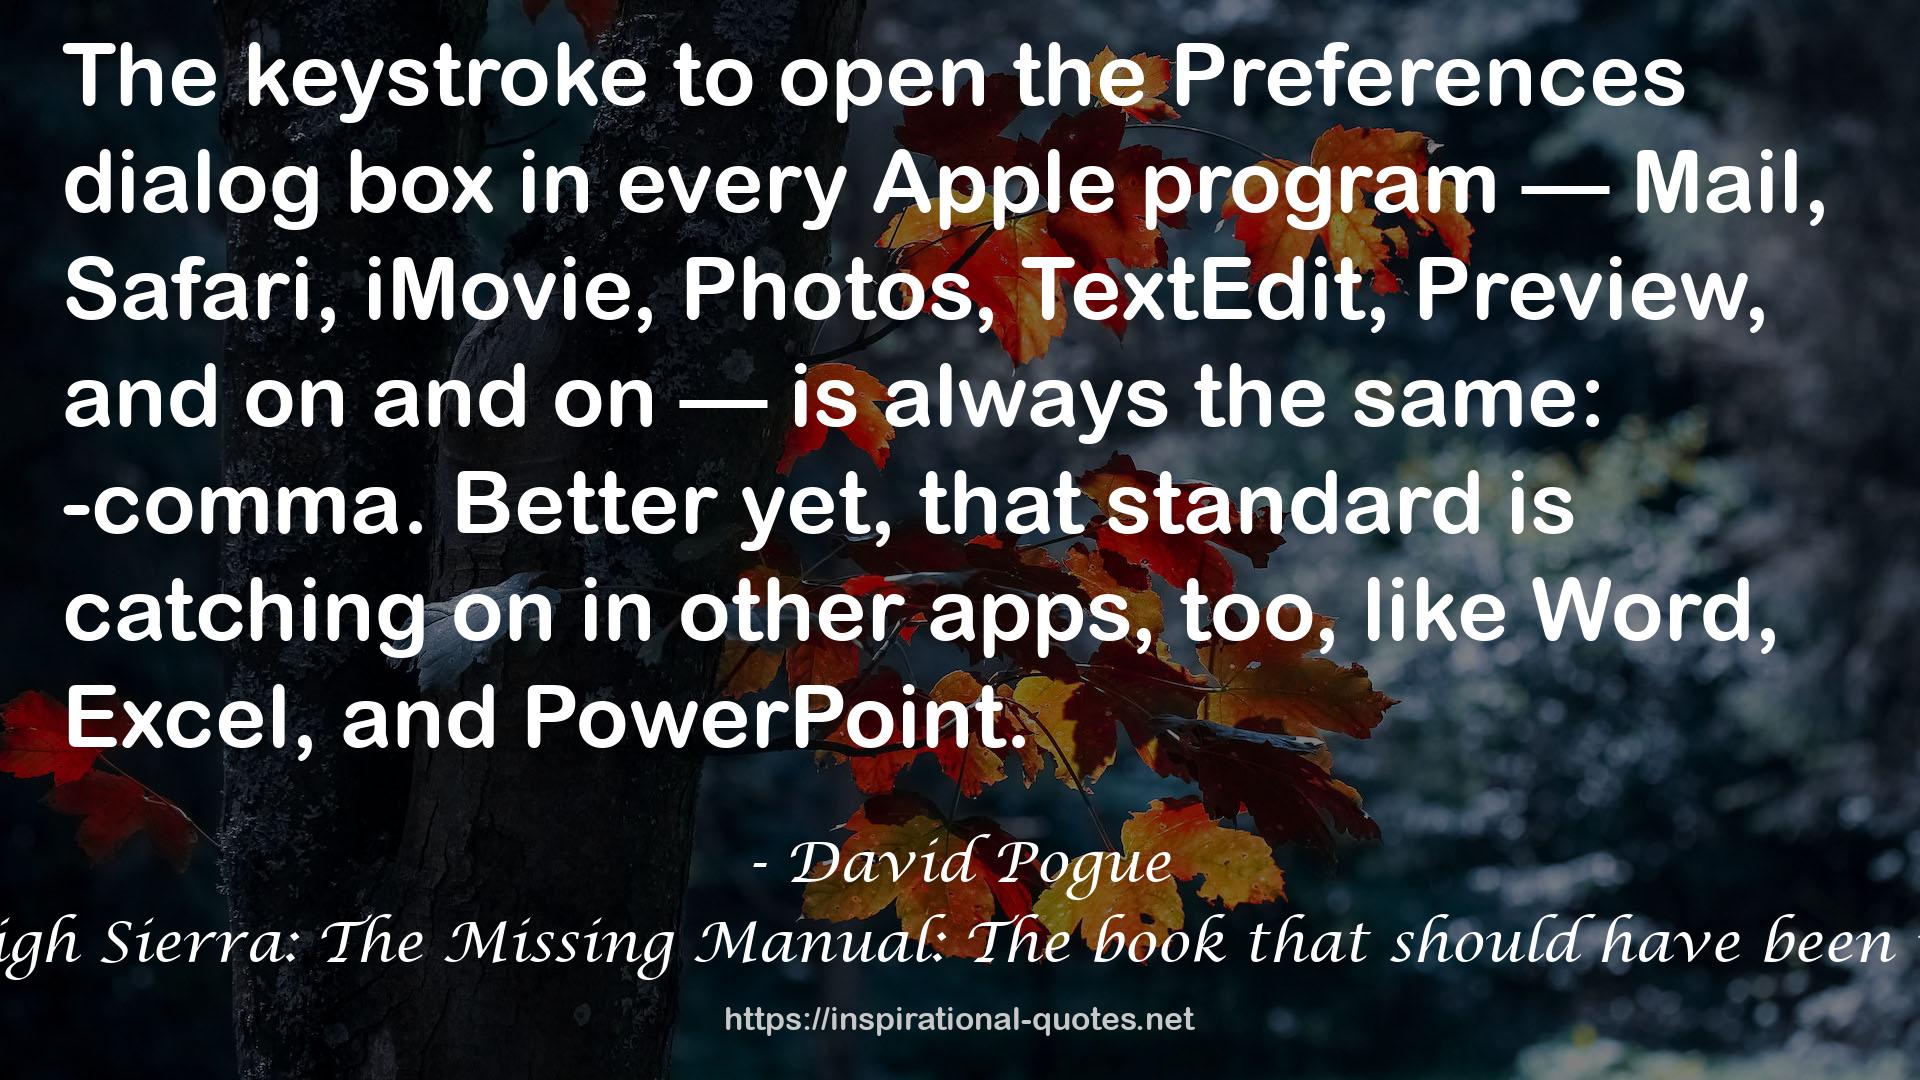 macOS High Sierra: The Missing Manual: The book that should have been in the box QUOTES